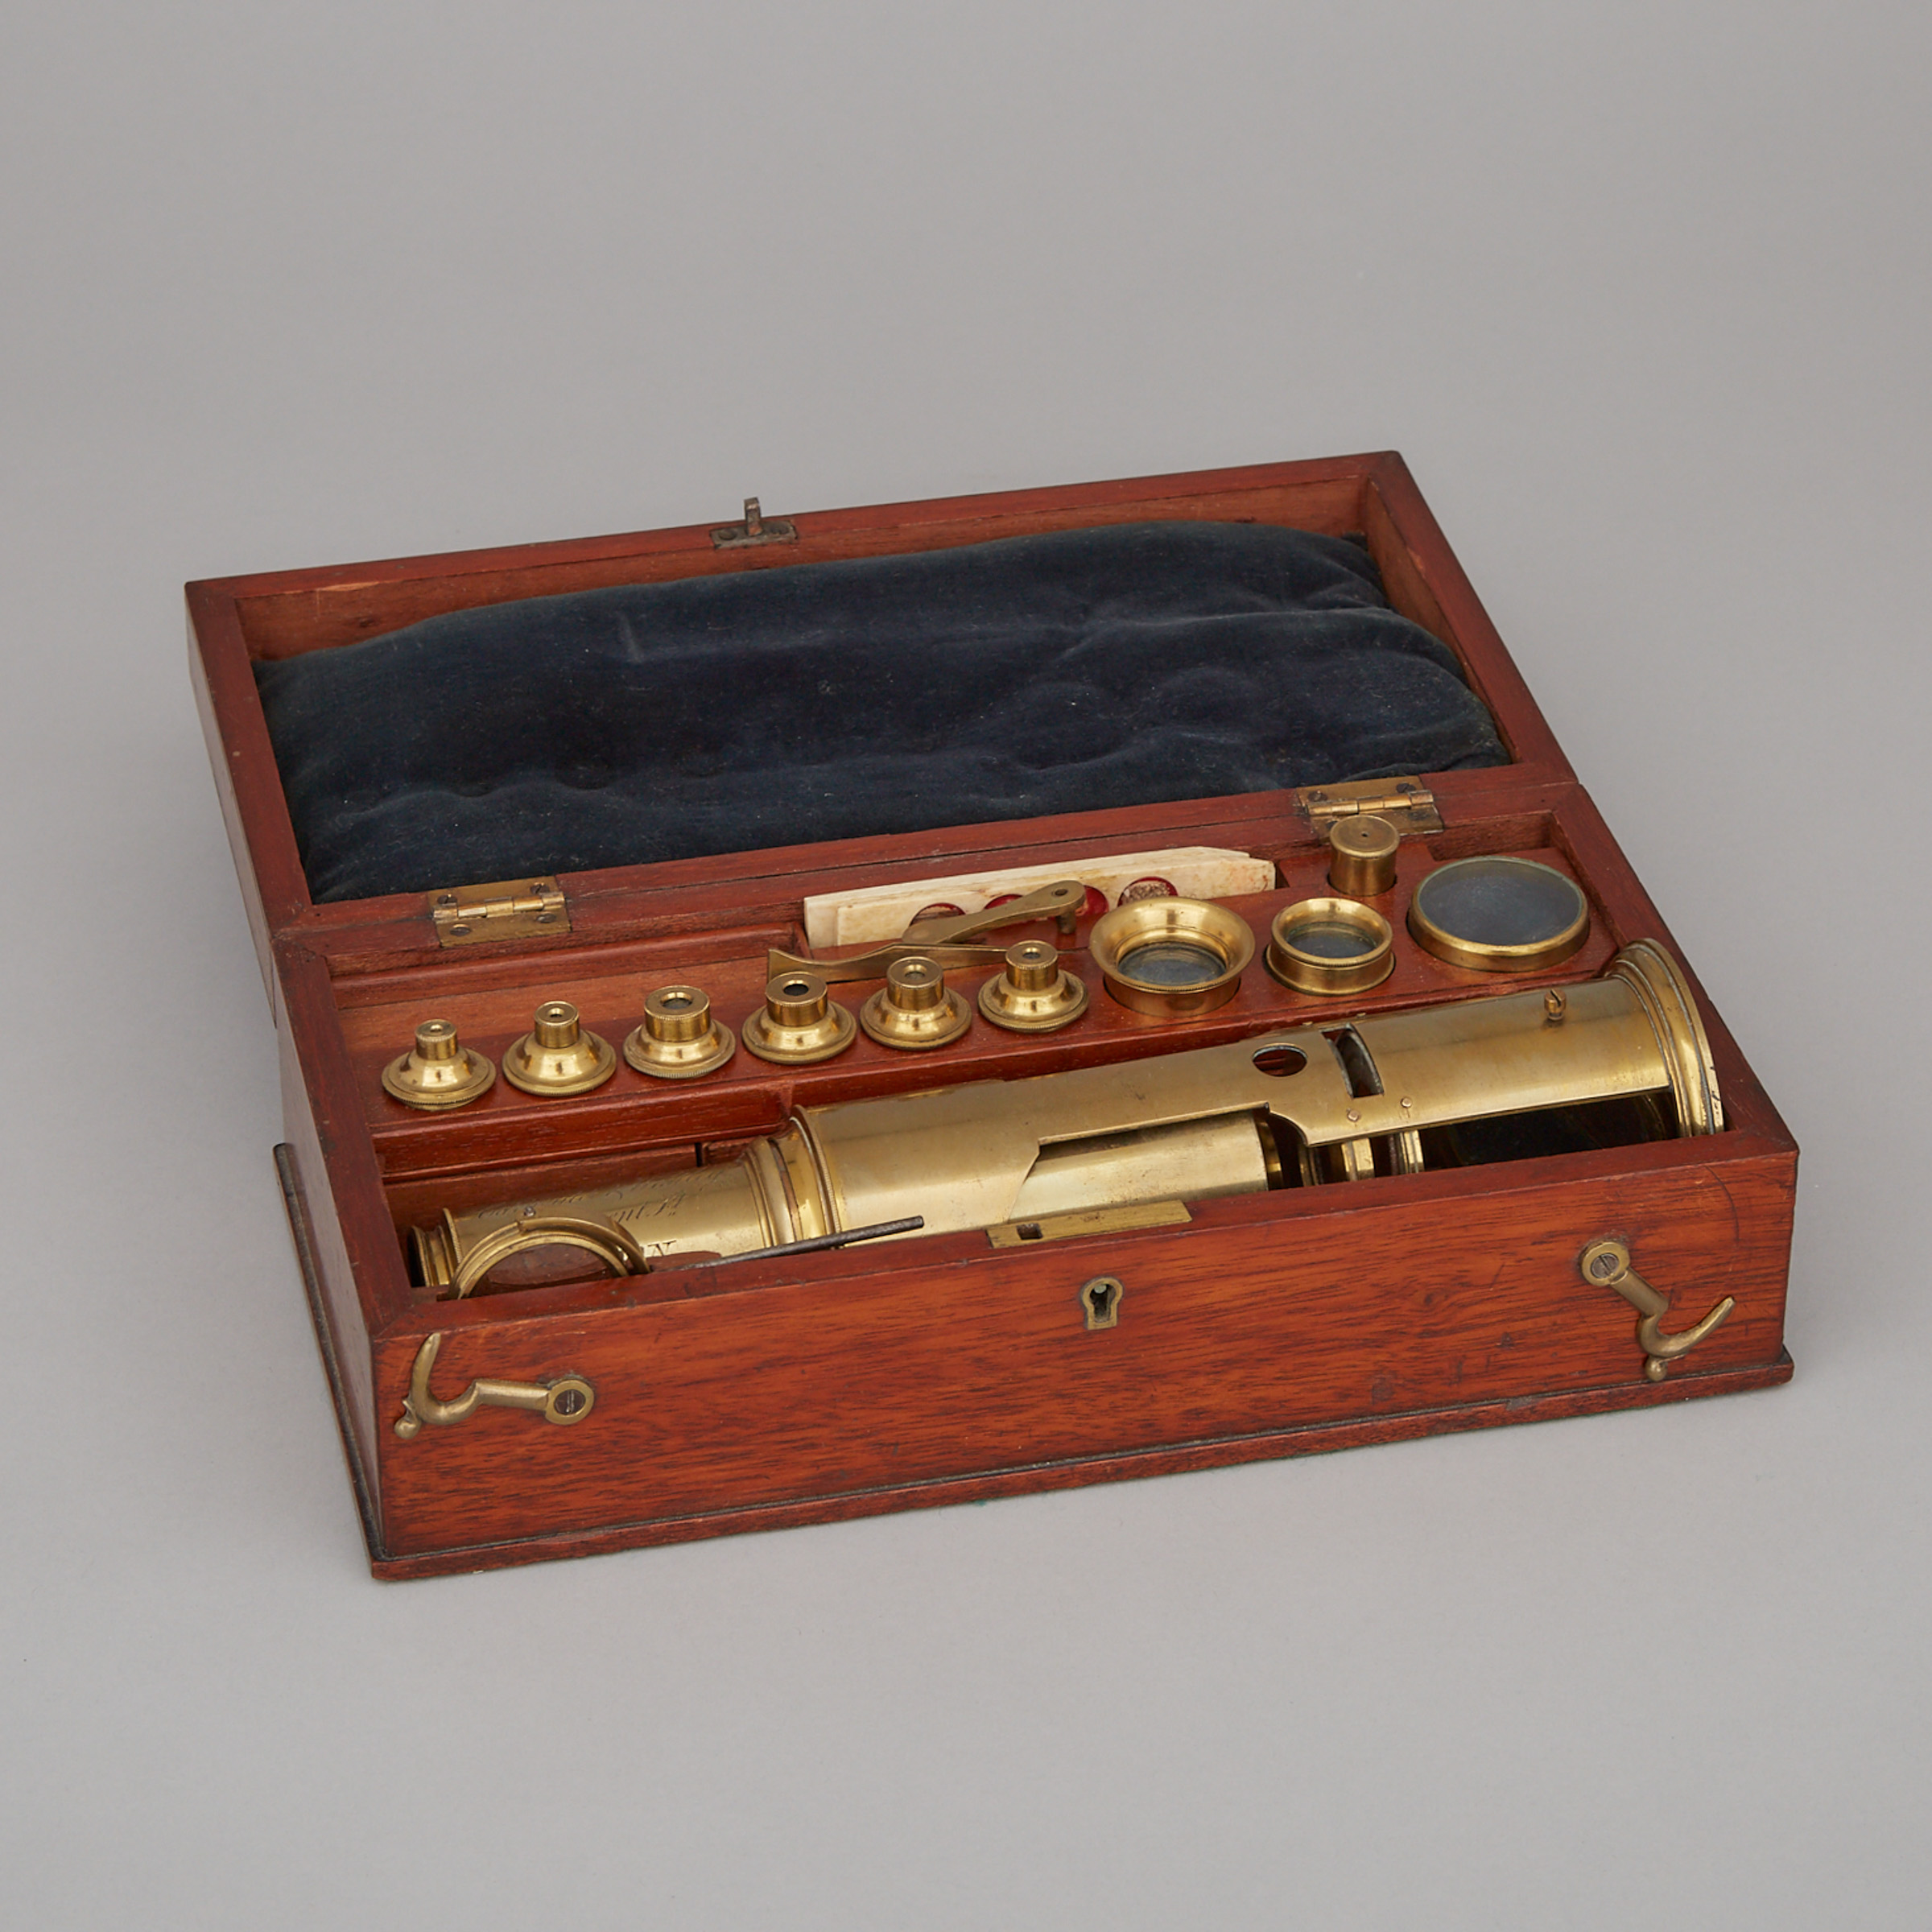 Early Victorian Lacquered Brass Martin Type Drum Microscope, Carpenter & Westley, London, c.1840